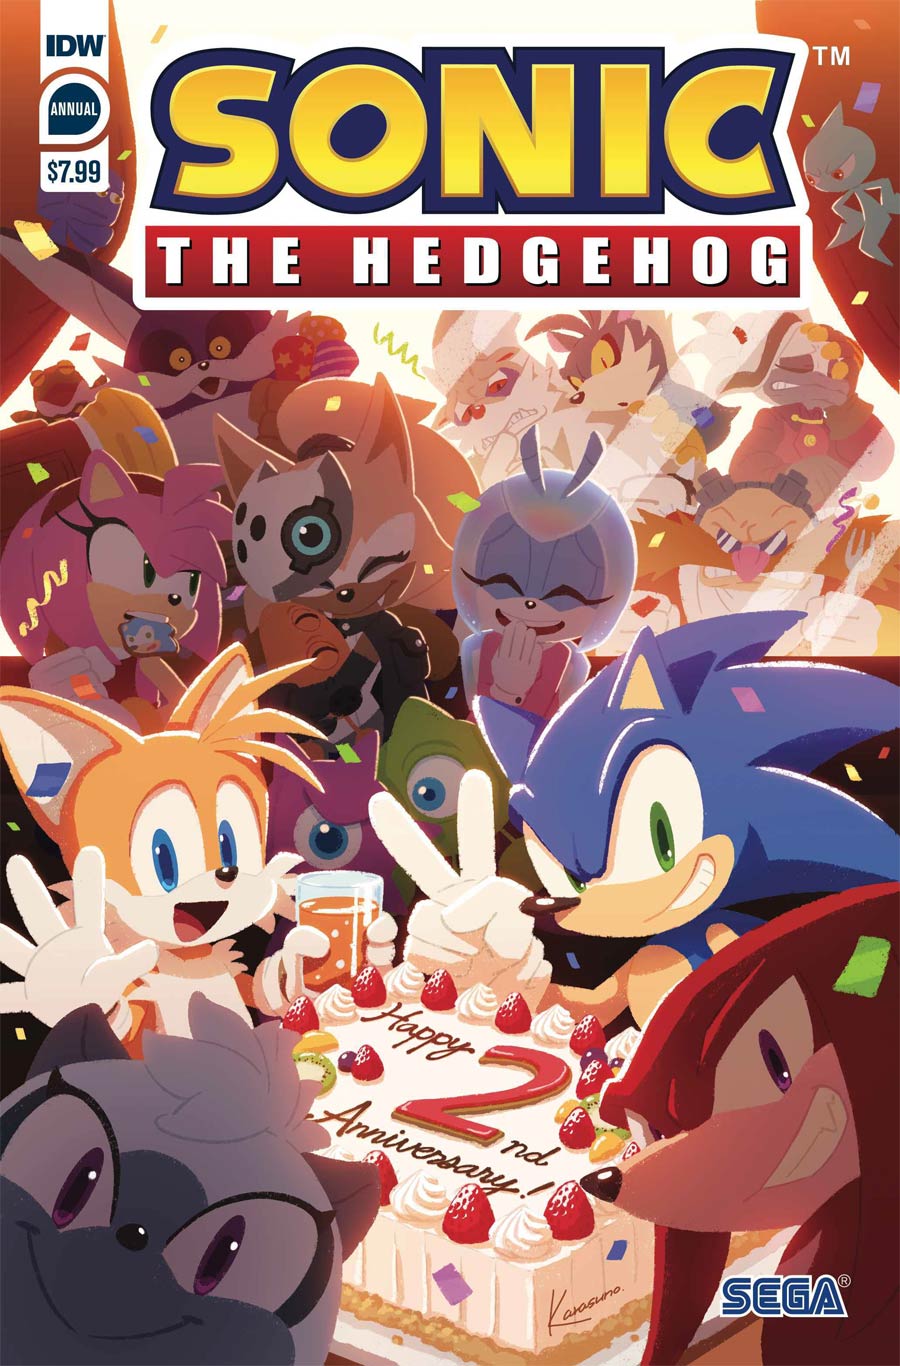 Sonic The Hedgehog Vol 3 Annual 2020 Cover A Regular Sonic Team Cover